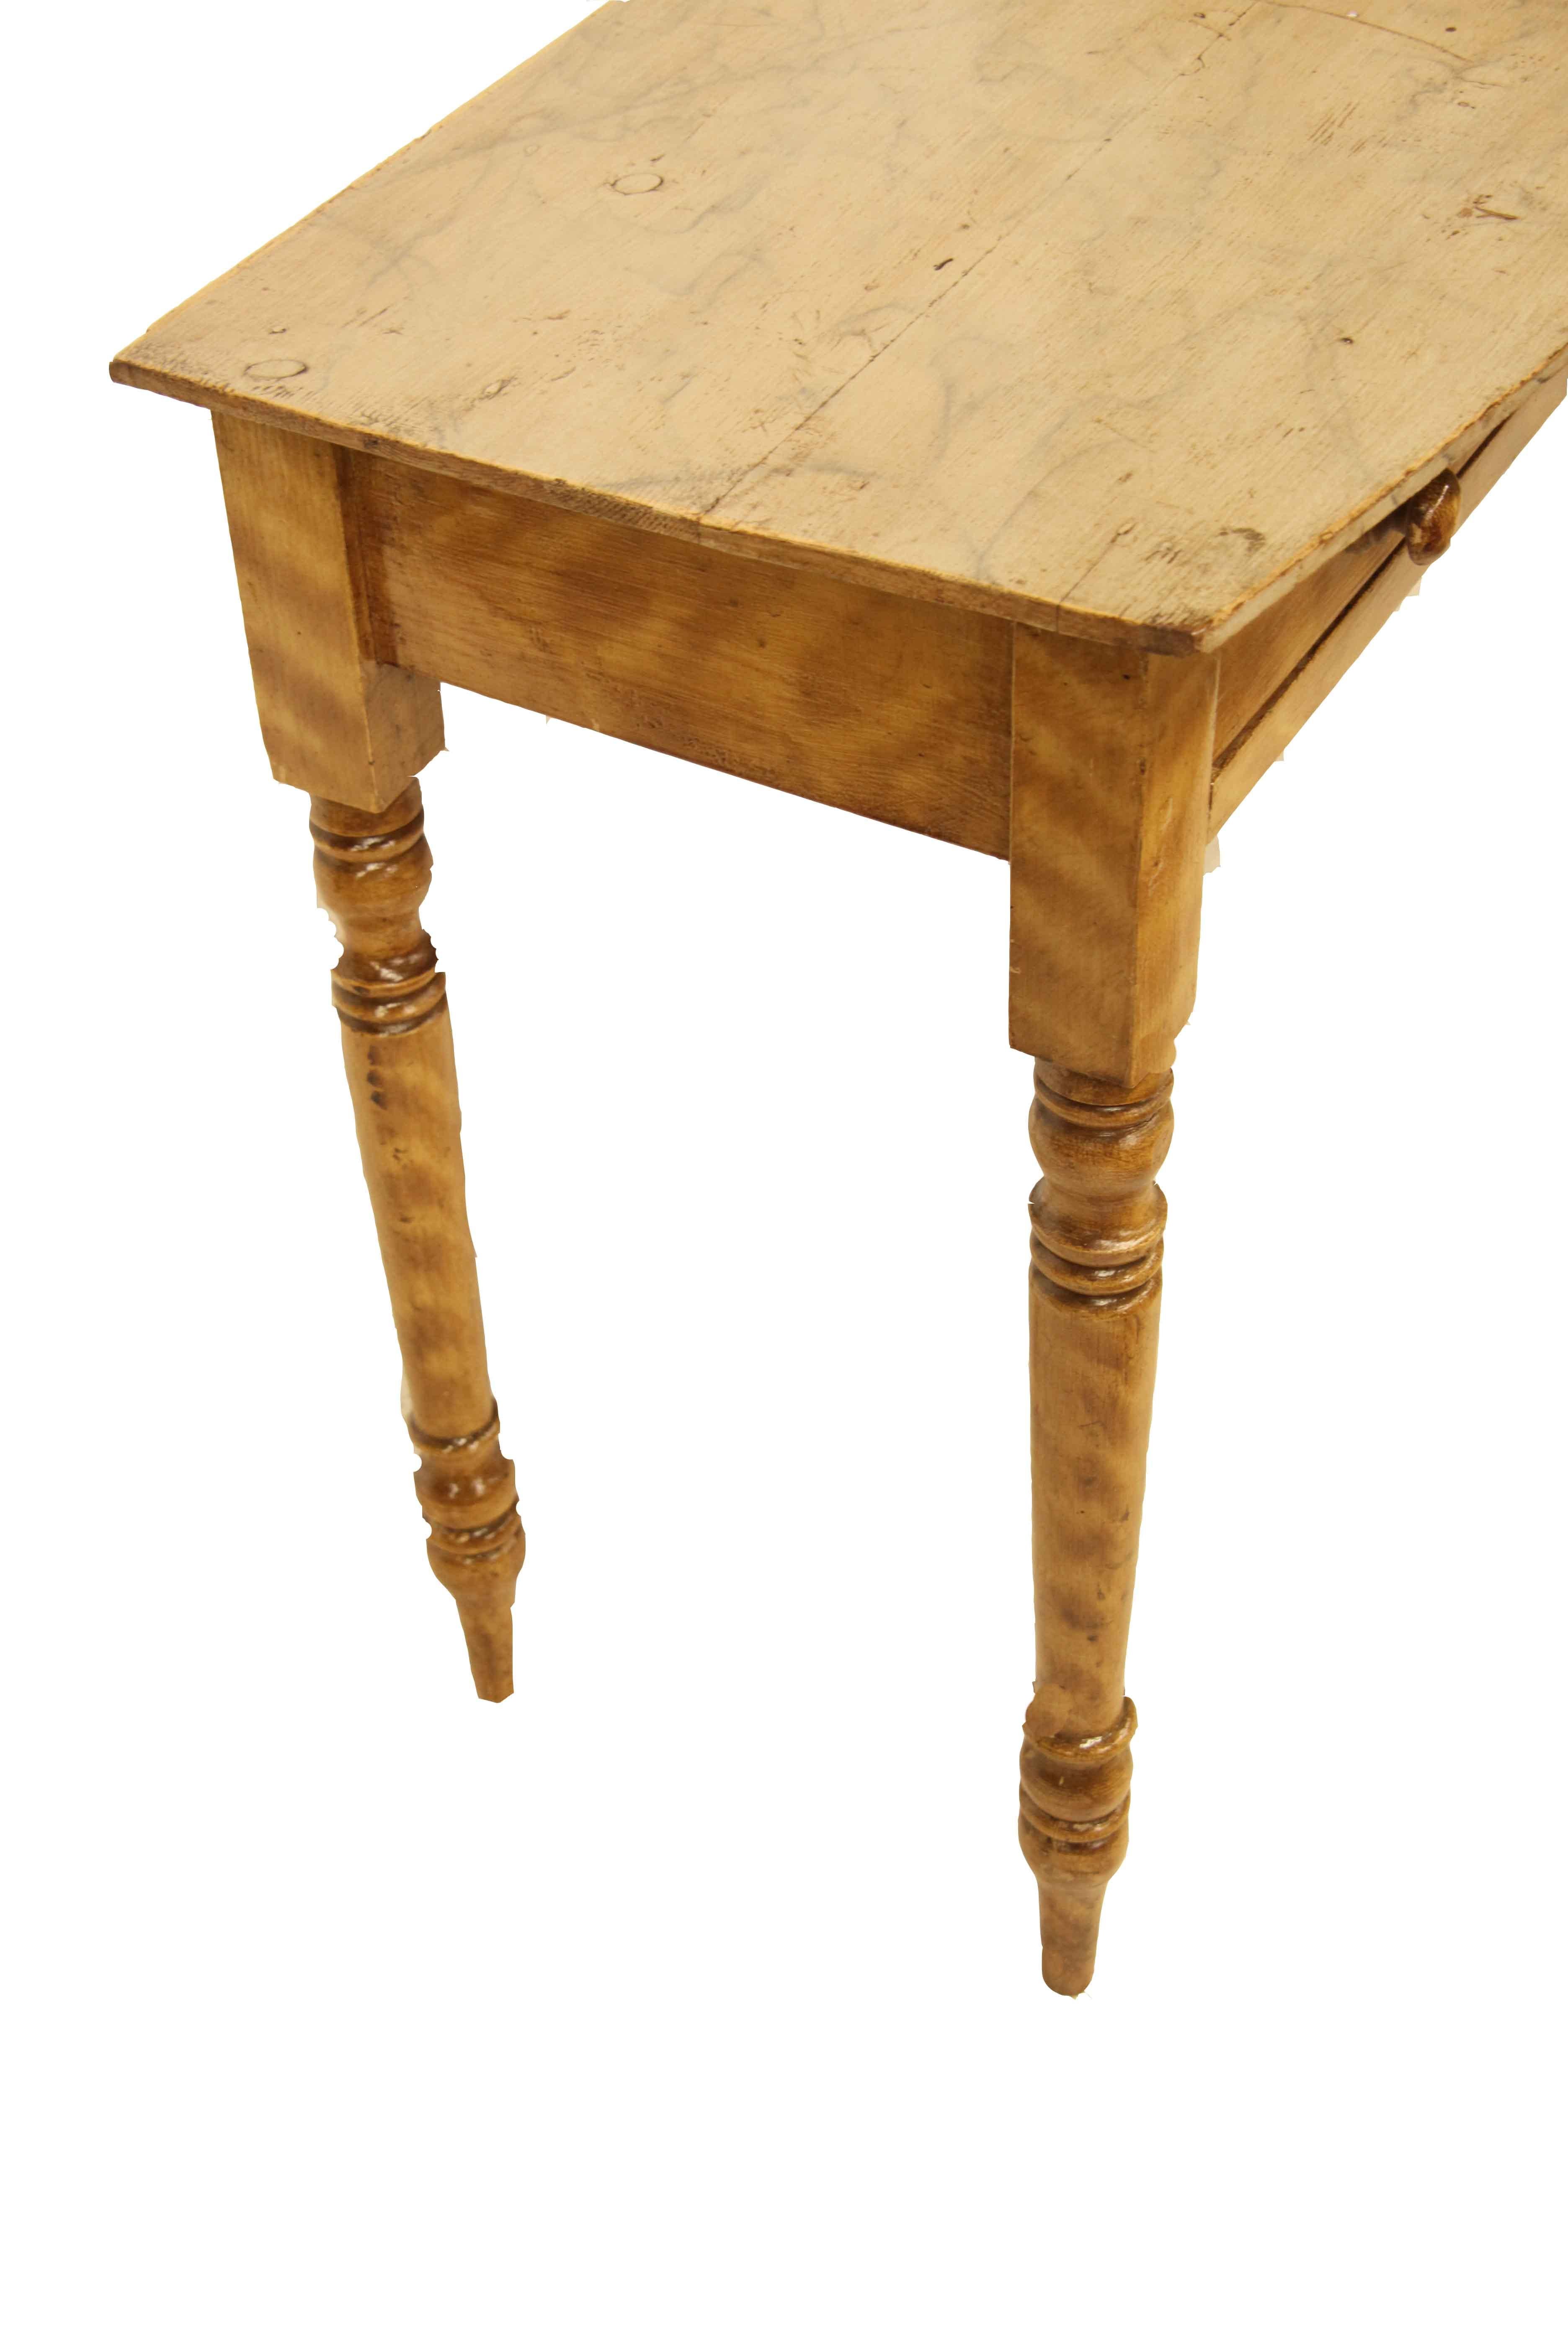 Grain painted end table, the bow front top is painted to simulate white marble, the rest of the table is painted to simulate flame birch. The wood knobs are original to the drawer, The legs have good proportions and pleasant turnings.